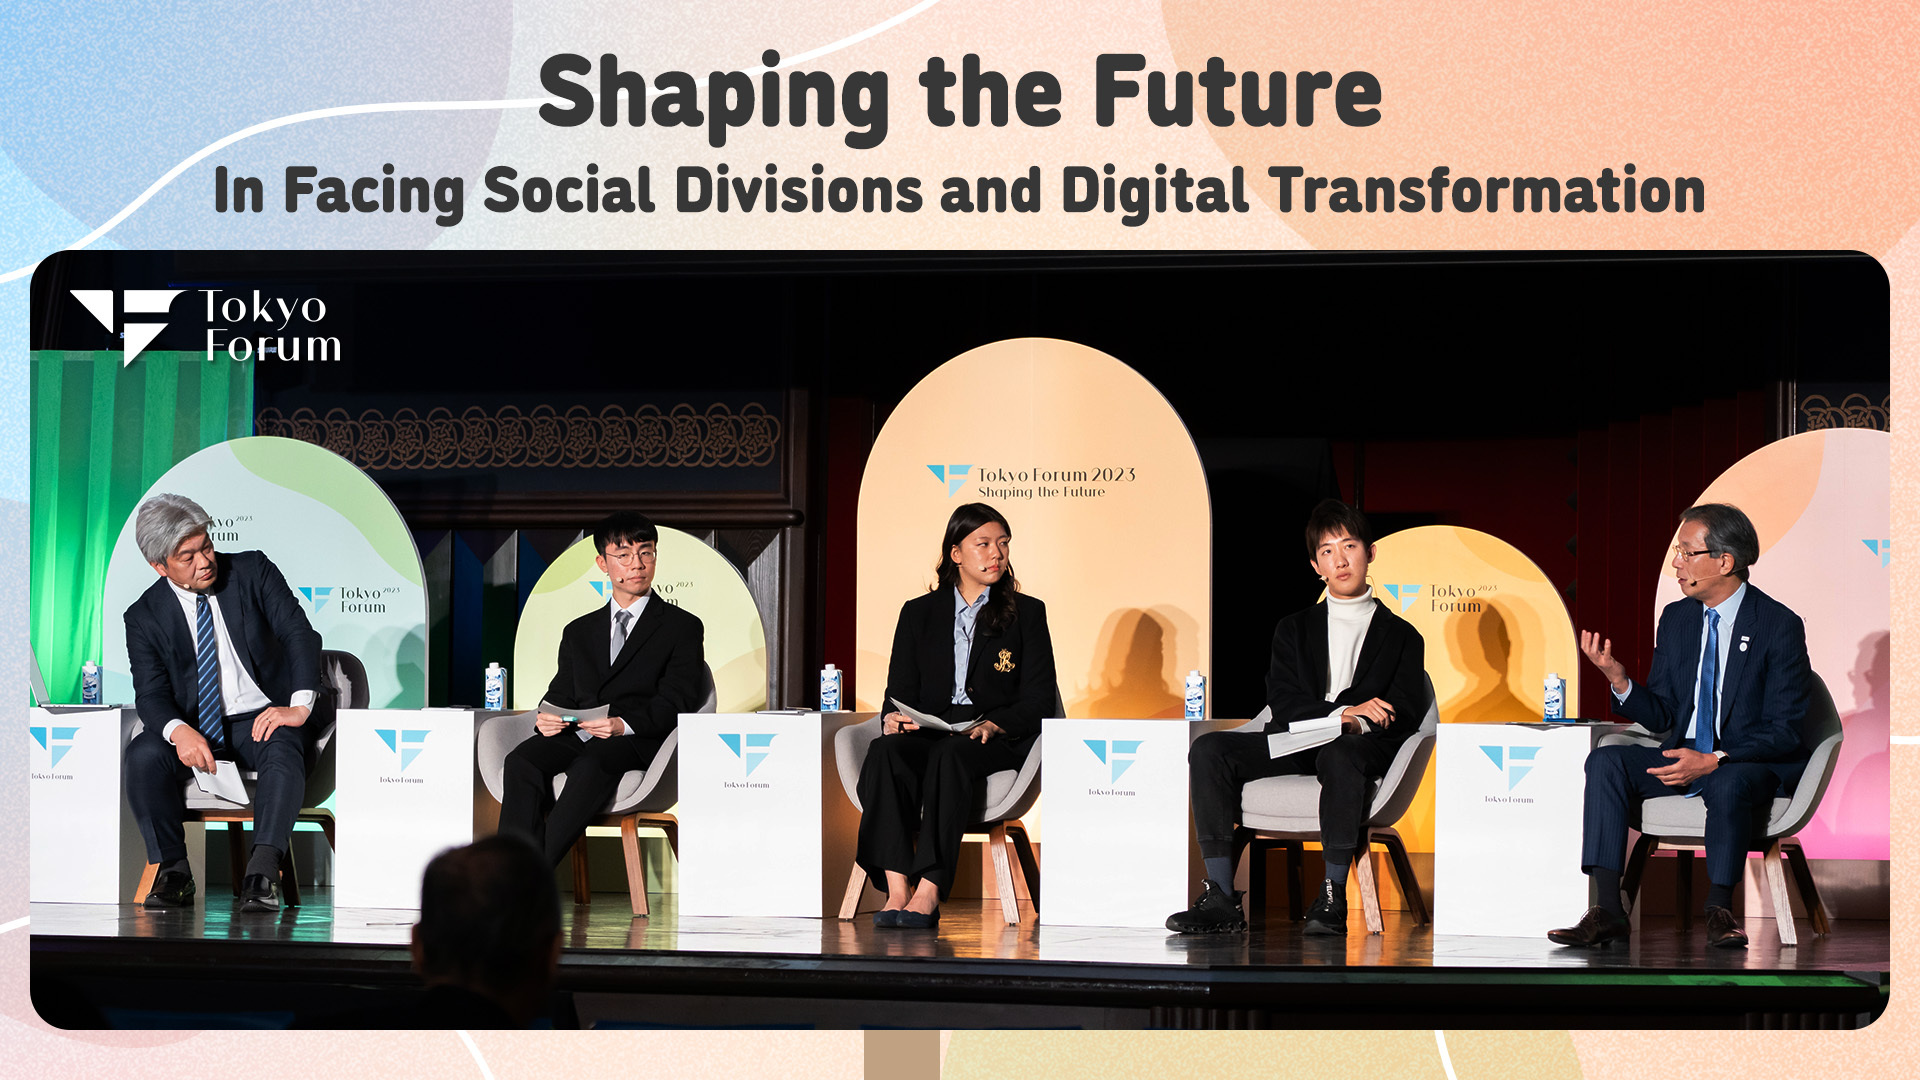 Day 2 | Shaping the Future: In Facing Social Divisions and Digital Transformation